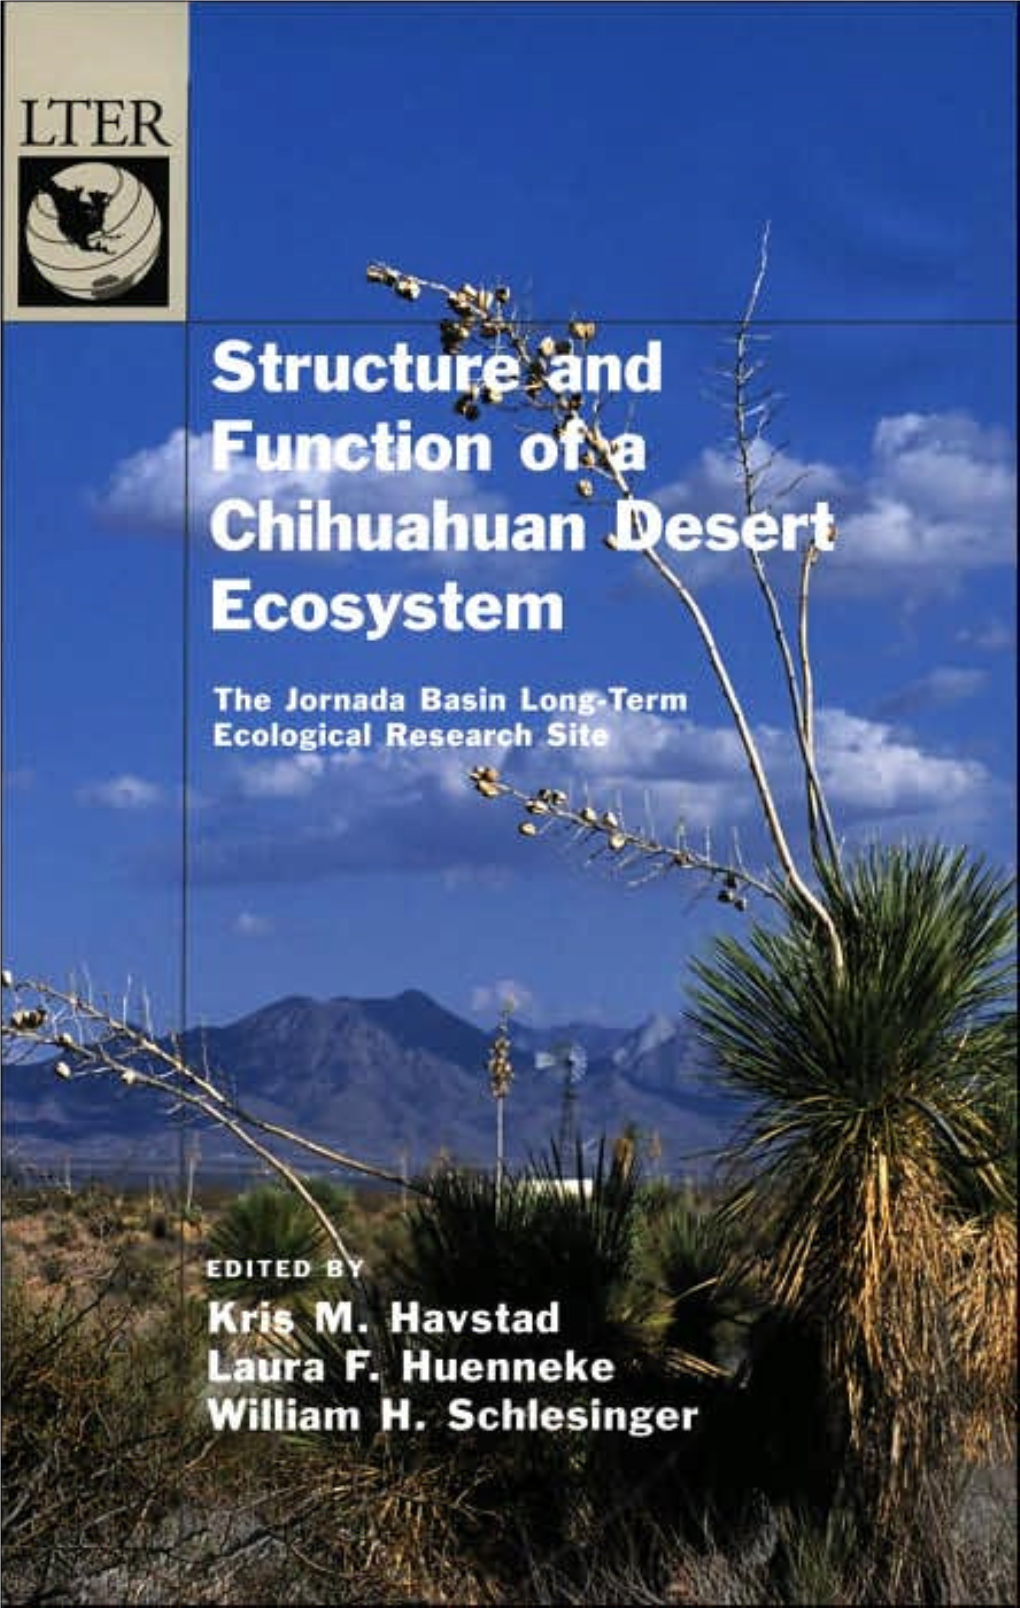 STRUCTURE and FUNCTION of a CHIHUAHUAN DESERT ECOSYSTEM LONG-TERM ECOLOGICAL RESEARCH NETWORK SERIES LTER Publications Committee